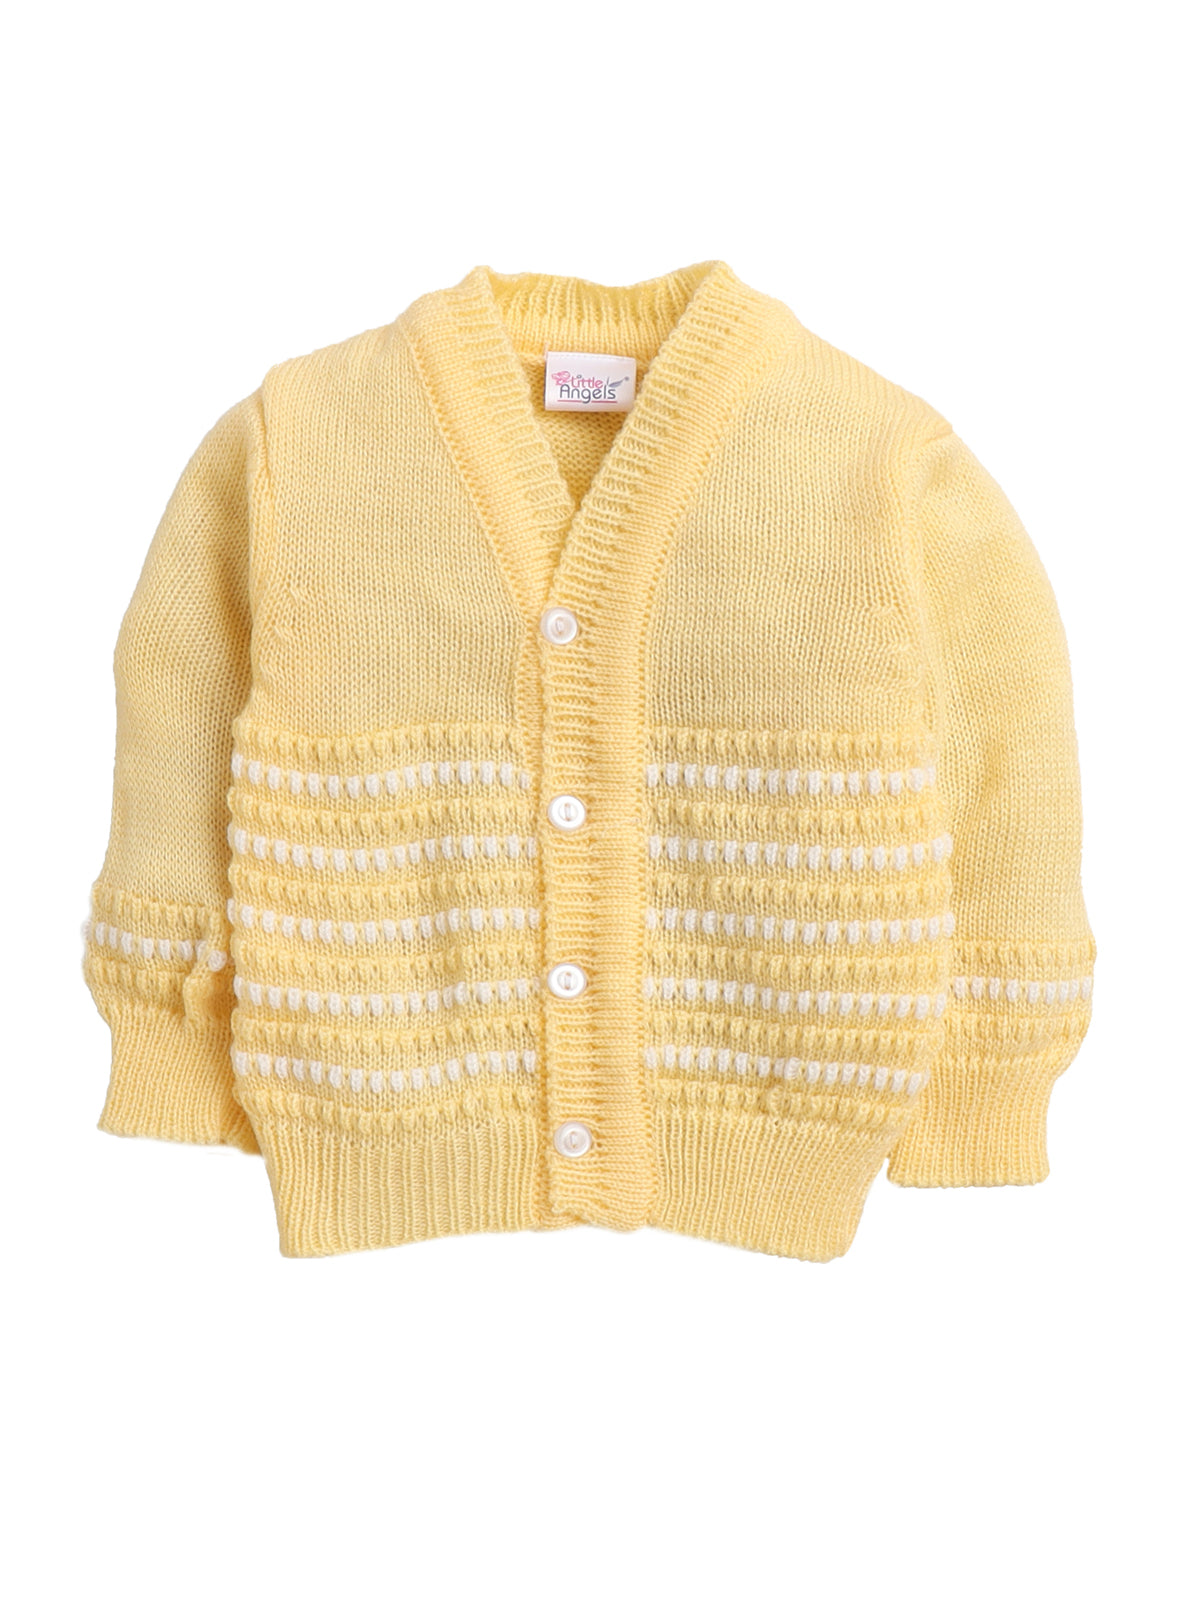 3 Pcs Sweater Full sleeves front open yellow color with matching cap and socks for baby